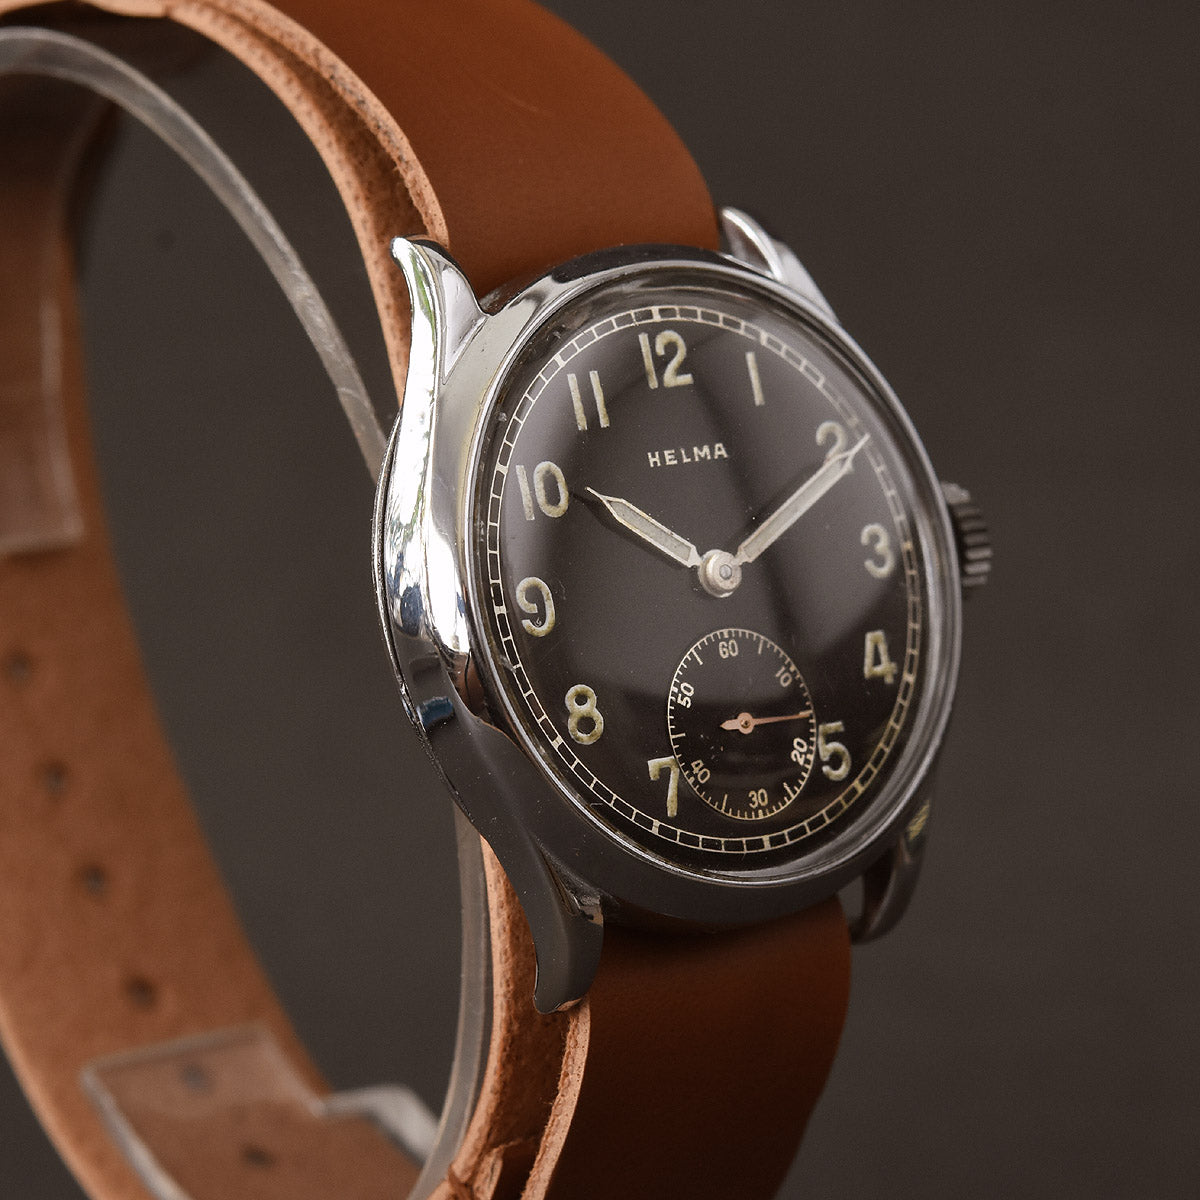 50s HELMA Wehrmachtswerk AS 1130 Gents Military Style Watch